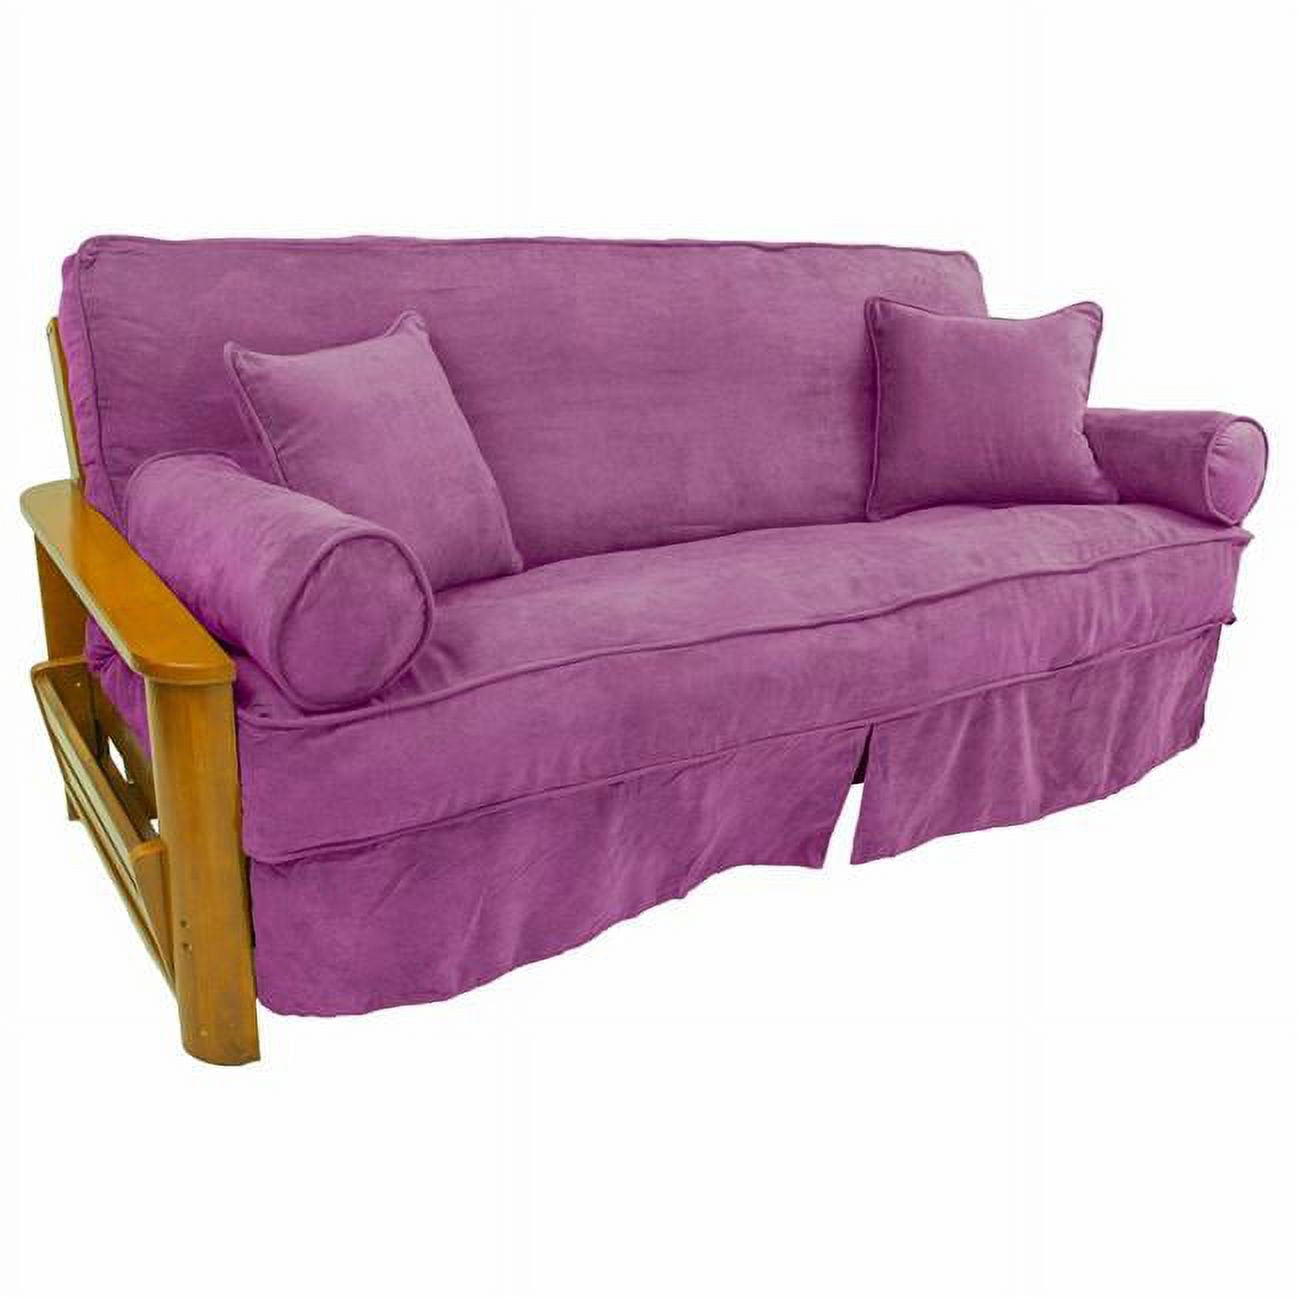 Picture of Blazing Needles 9672-CD-MS-UV 8 to 9 in. Solid Microsuede Double Corded Full Futon Slipcover Set with Four Throw Pillows, Ultra Violet - Set of 5